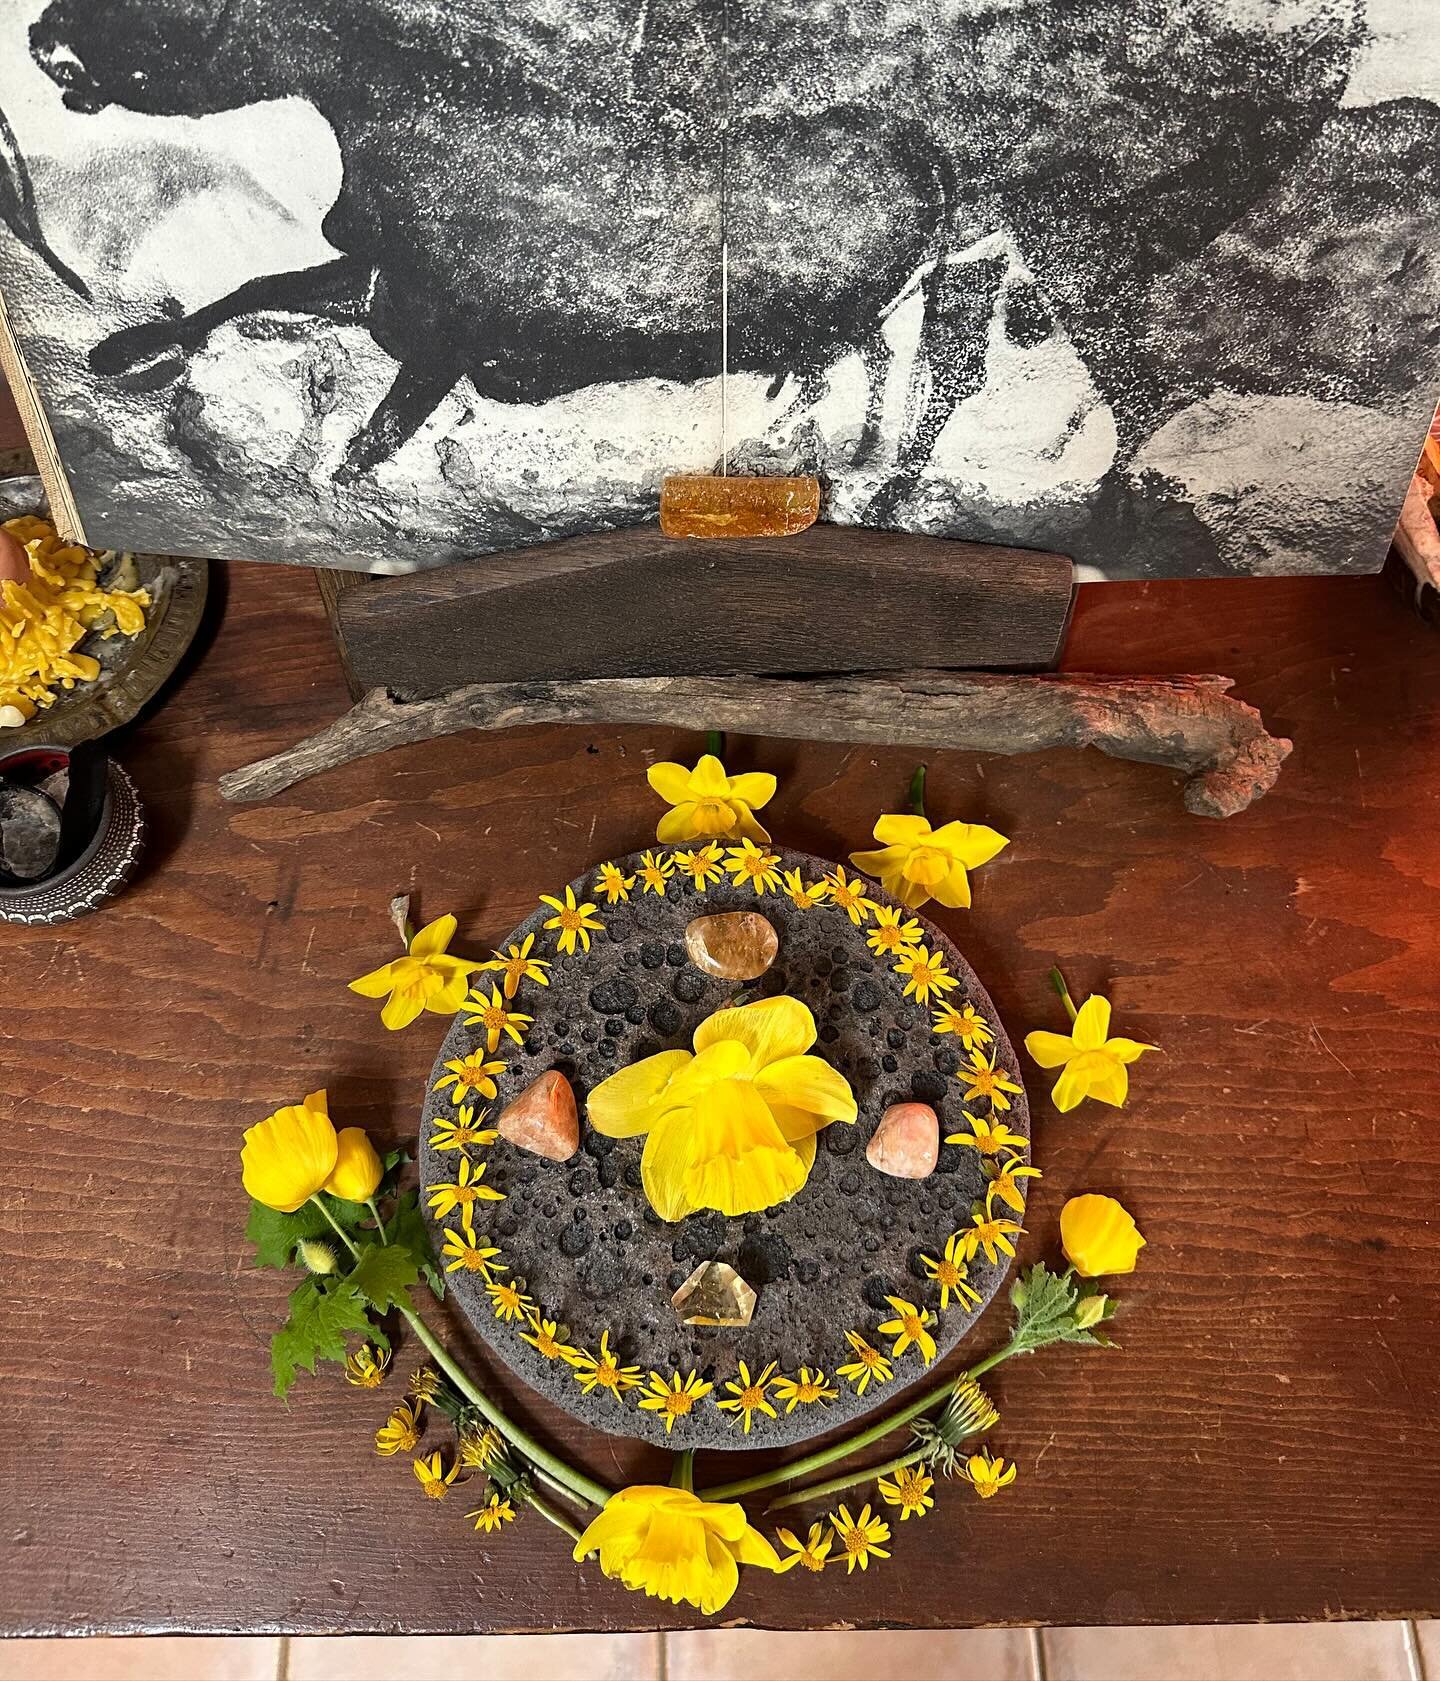 Incredible total eclipse altar made by the absolute lunar genius sweeties @lesley.gold @asiasuler using my moon altars oh my Gaia, what an honour🌒

Should I add these back to the site VOTE BELOW, LIKE &amp; subscribe!!!